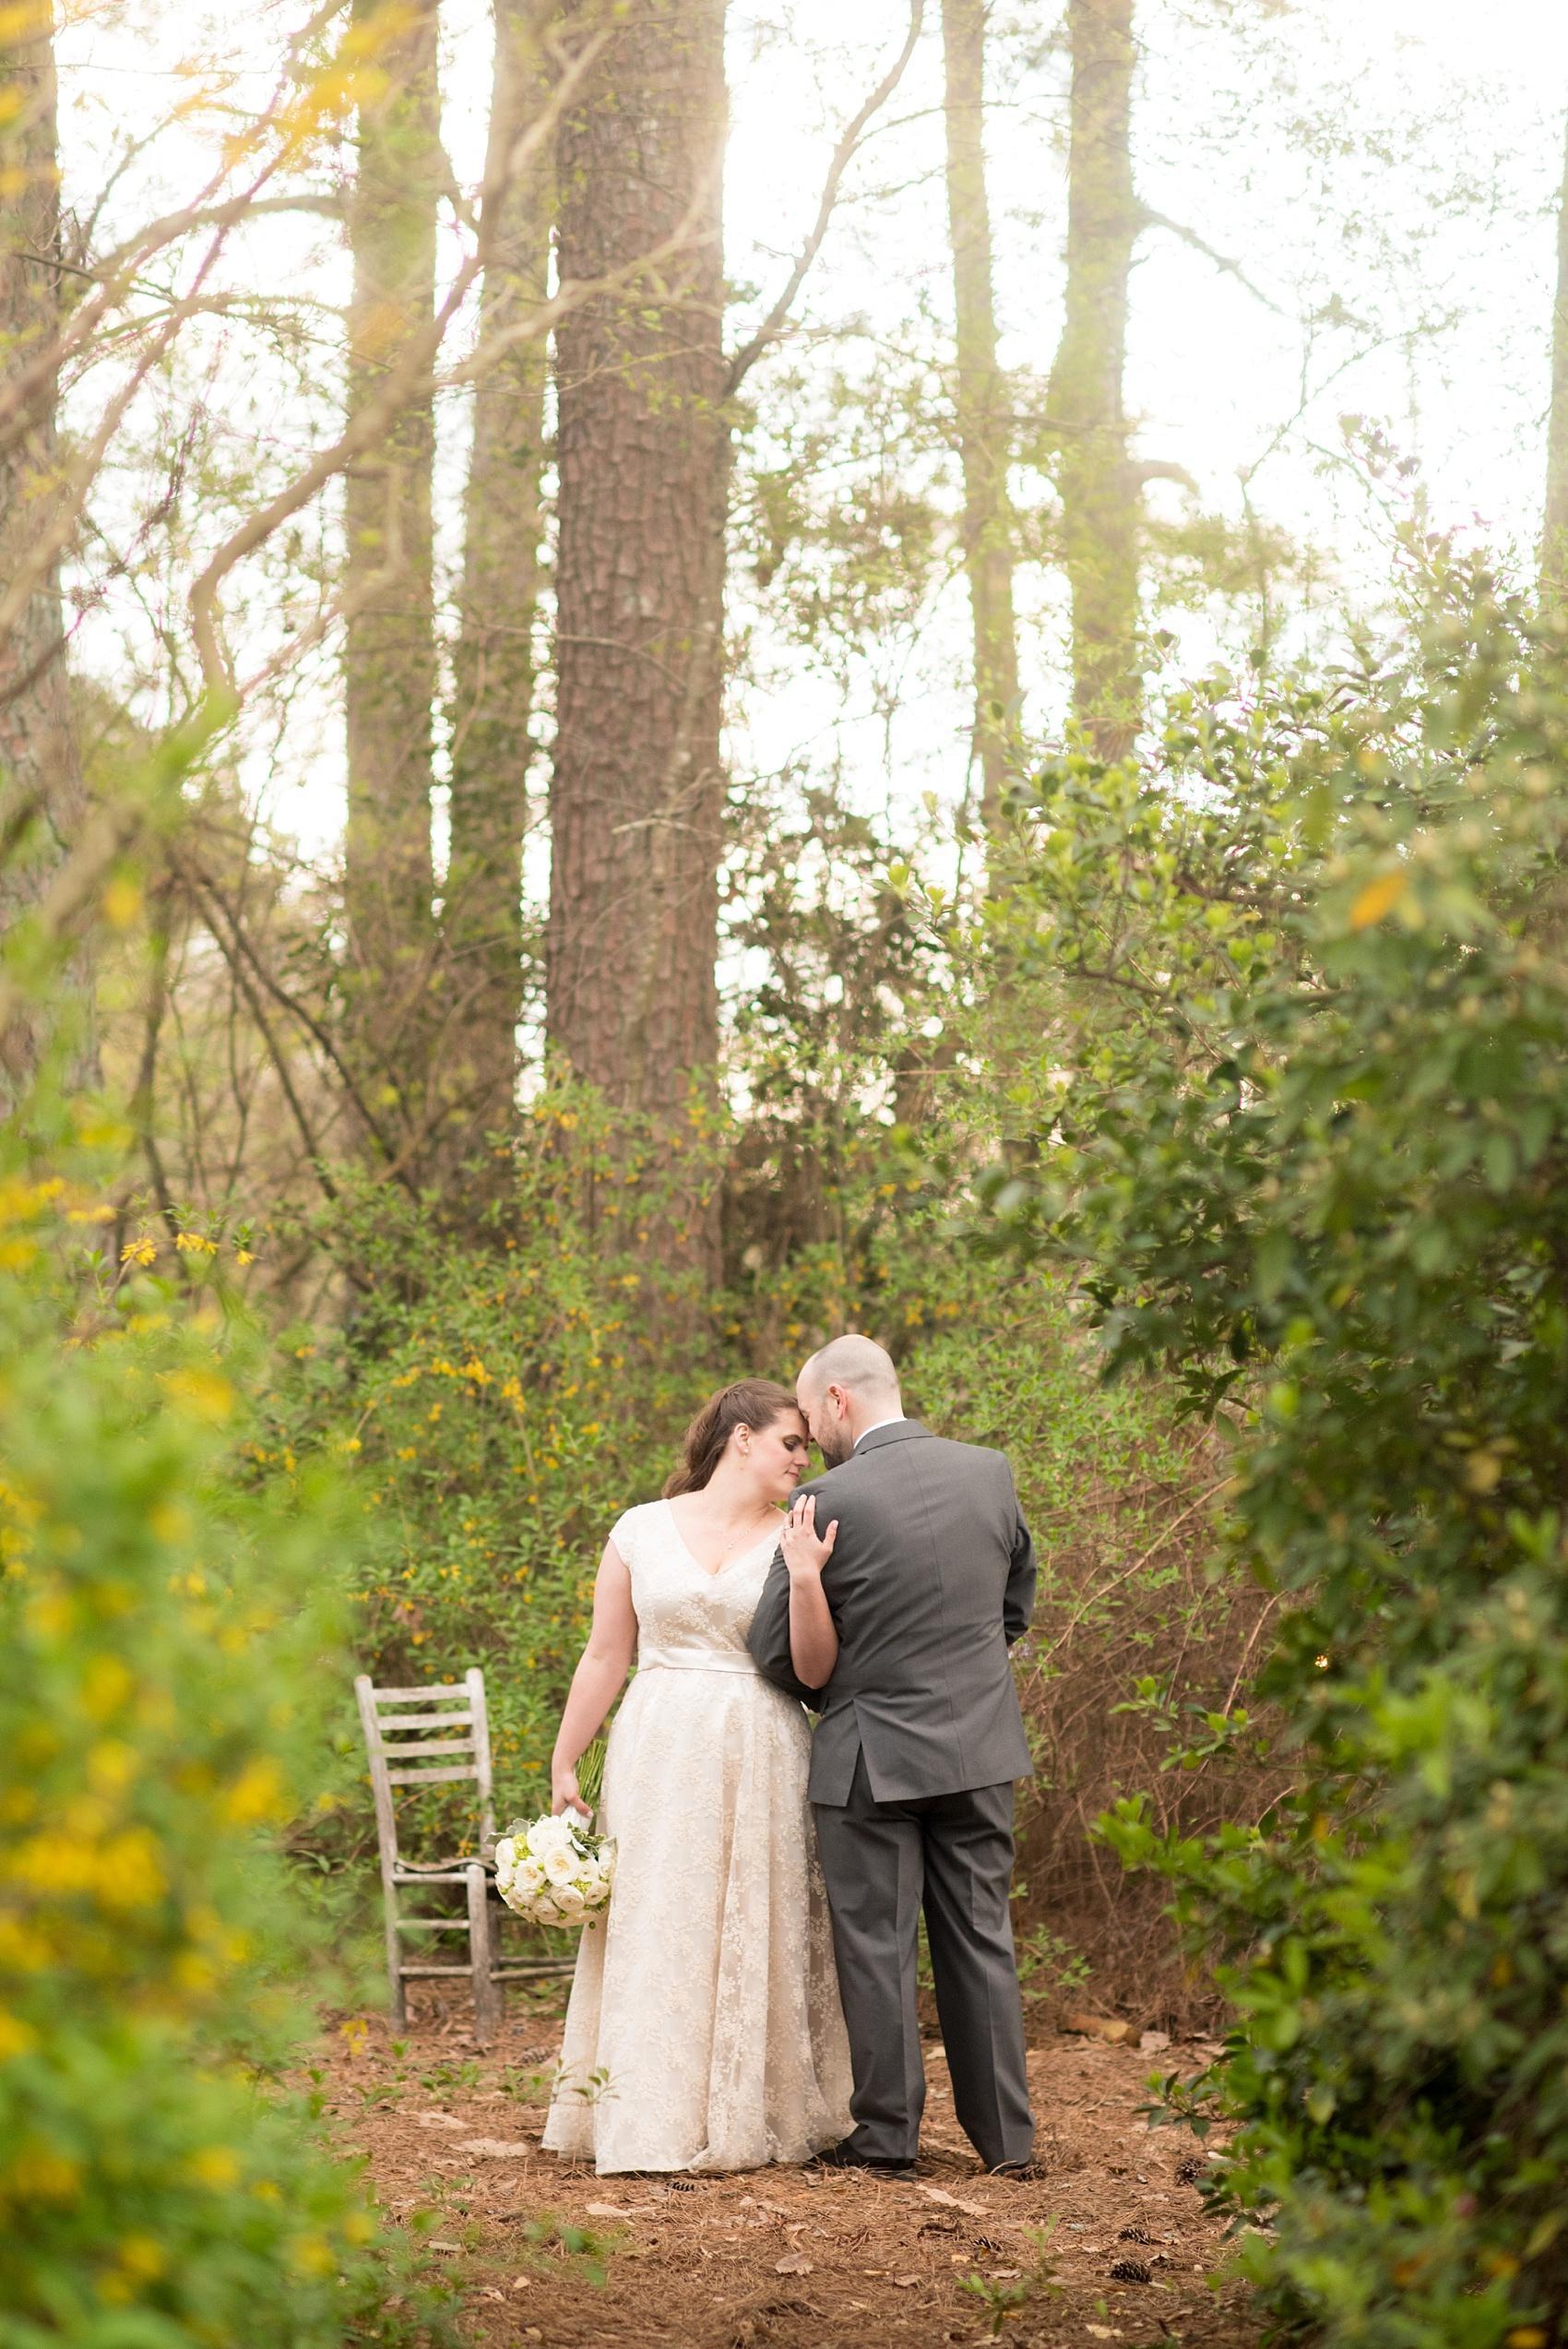 Golden hour bride and groom portrait in yellow spring flowers at a Four Oaks Manor wedding in Atlanta. Photos by Mikkel Paige Photography.